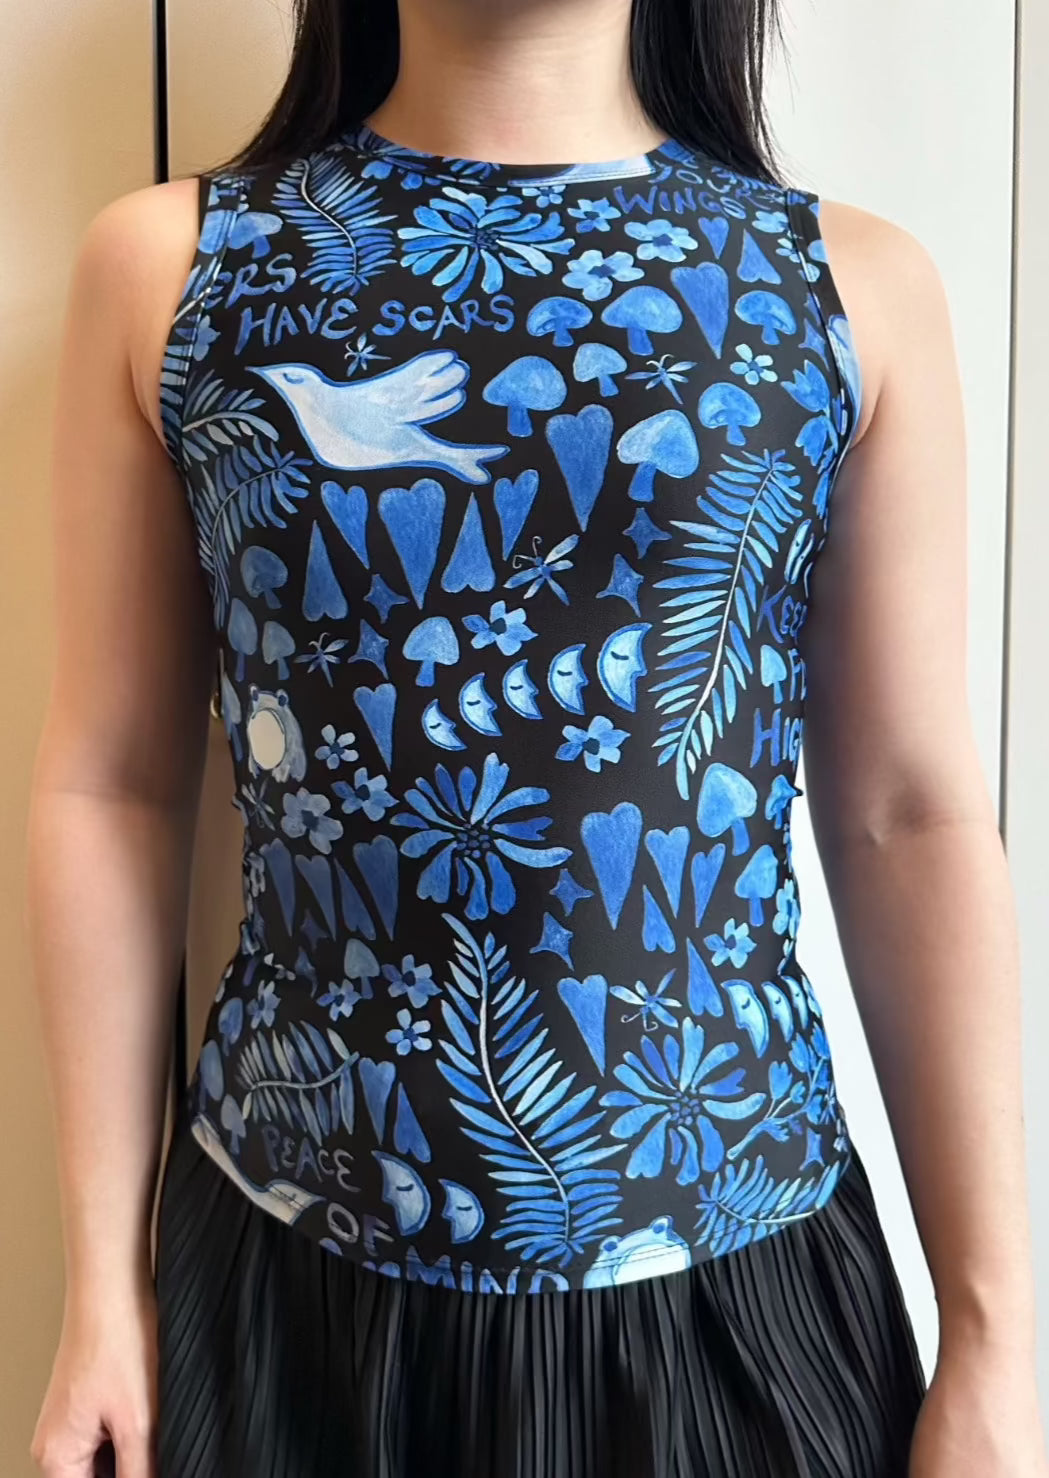 Printed recycled jersey sleeveless top in blue Lazy Boy Floral printed on black , water resistant fabric.